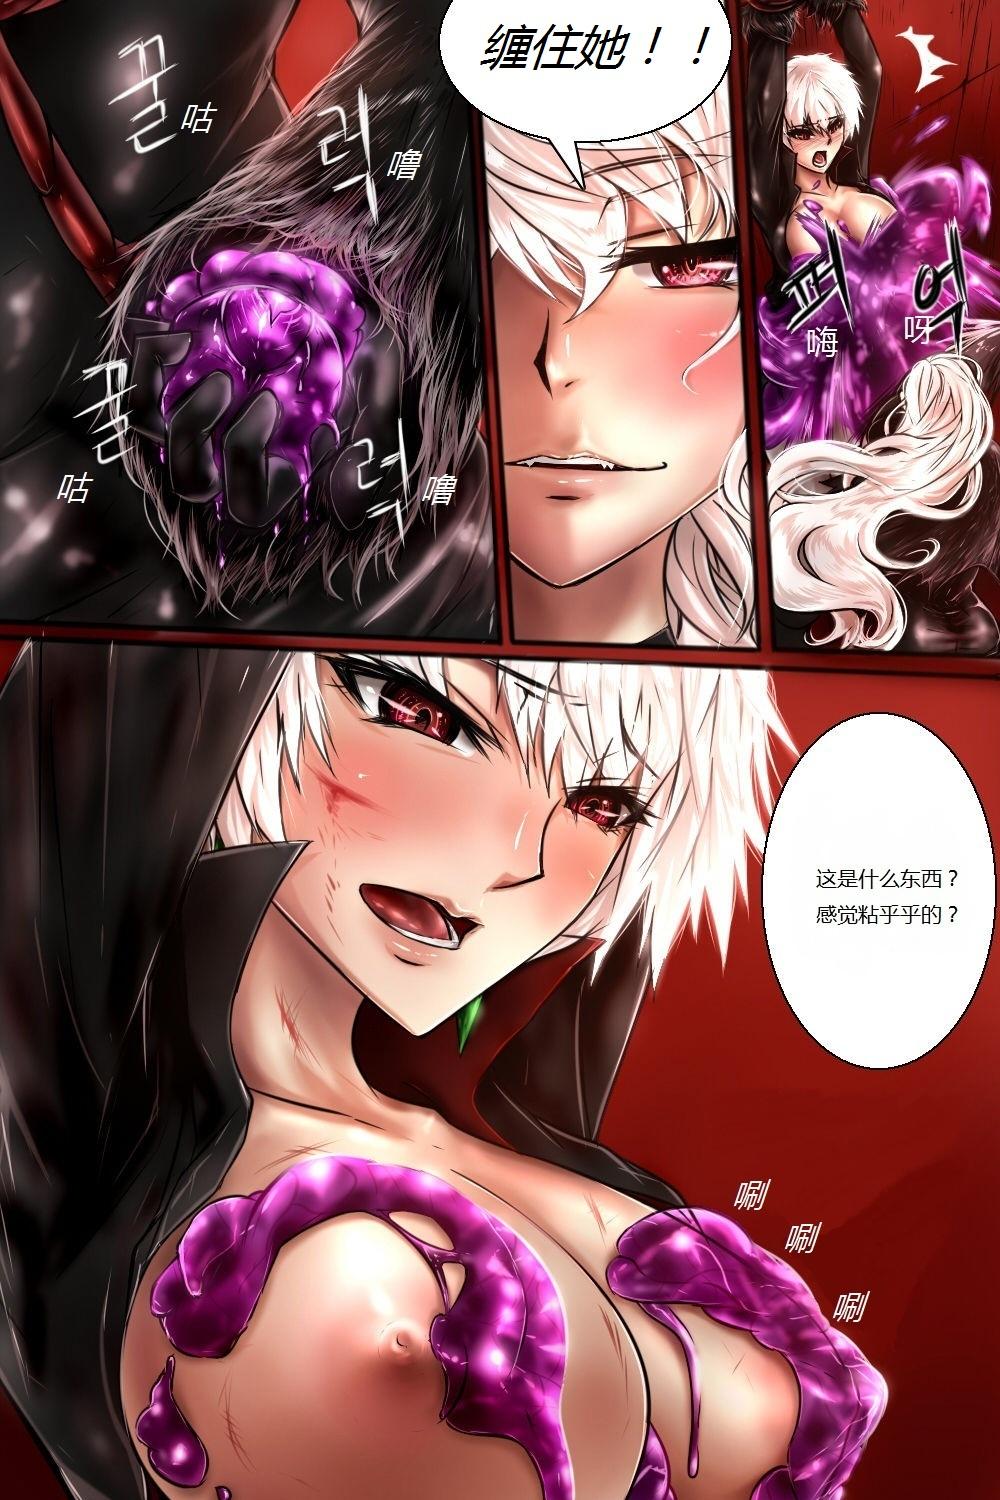 Made 여왕x귀족 후반 - Dungeon fighter online Groupsex - Page 7